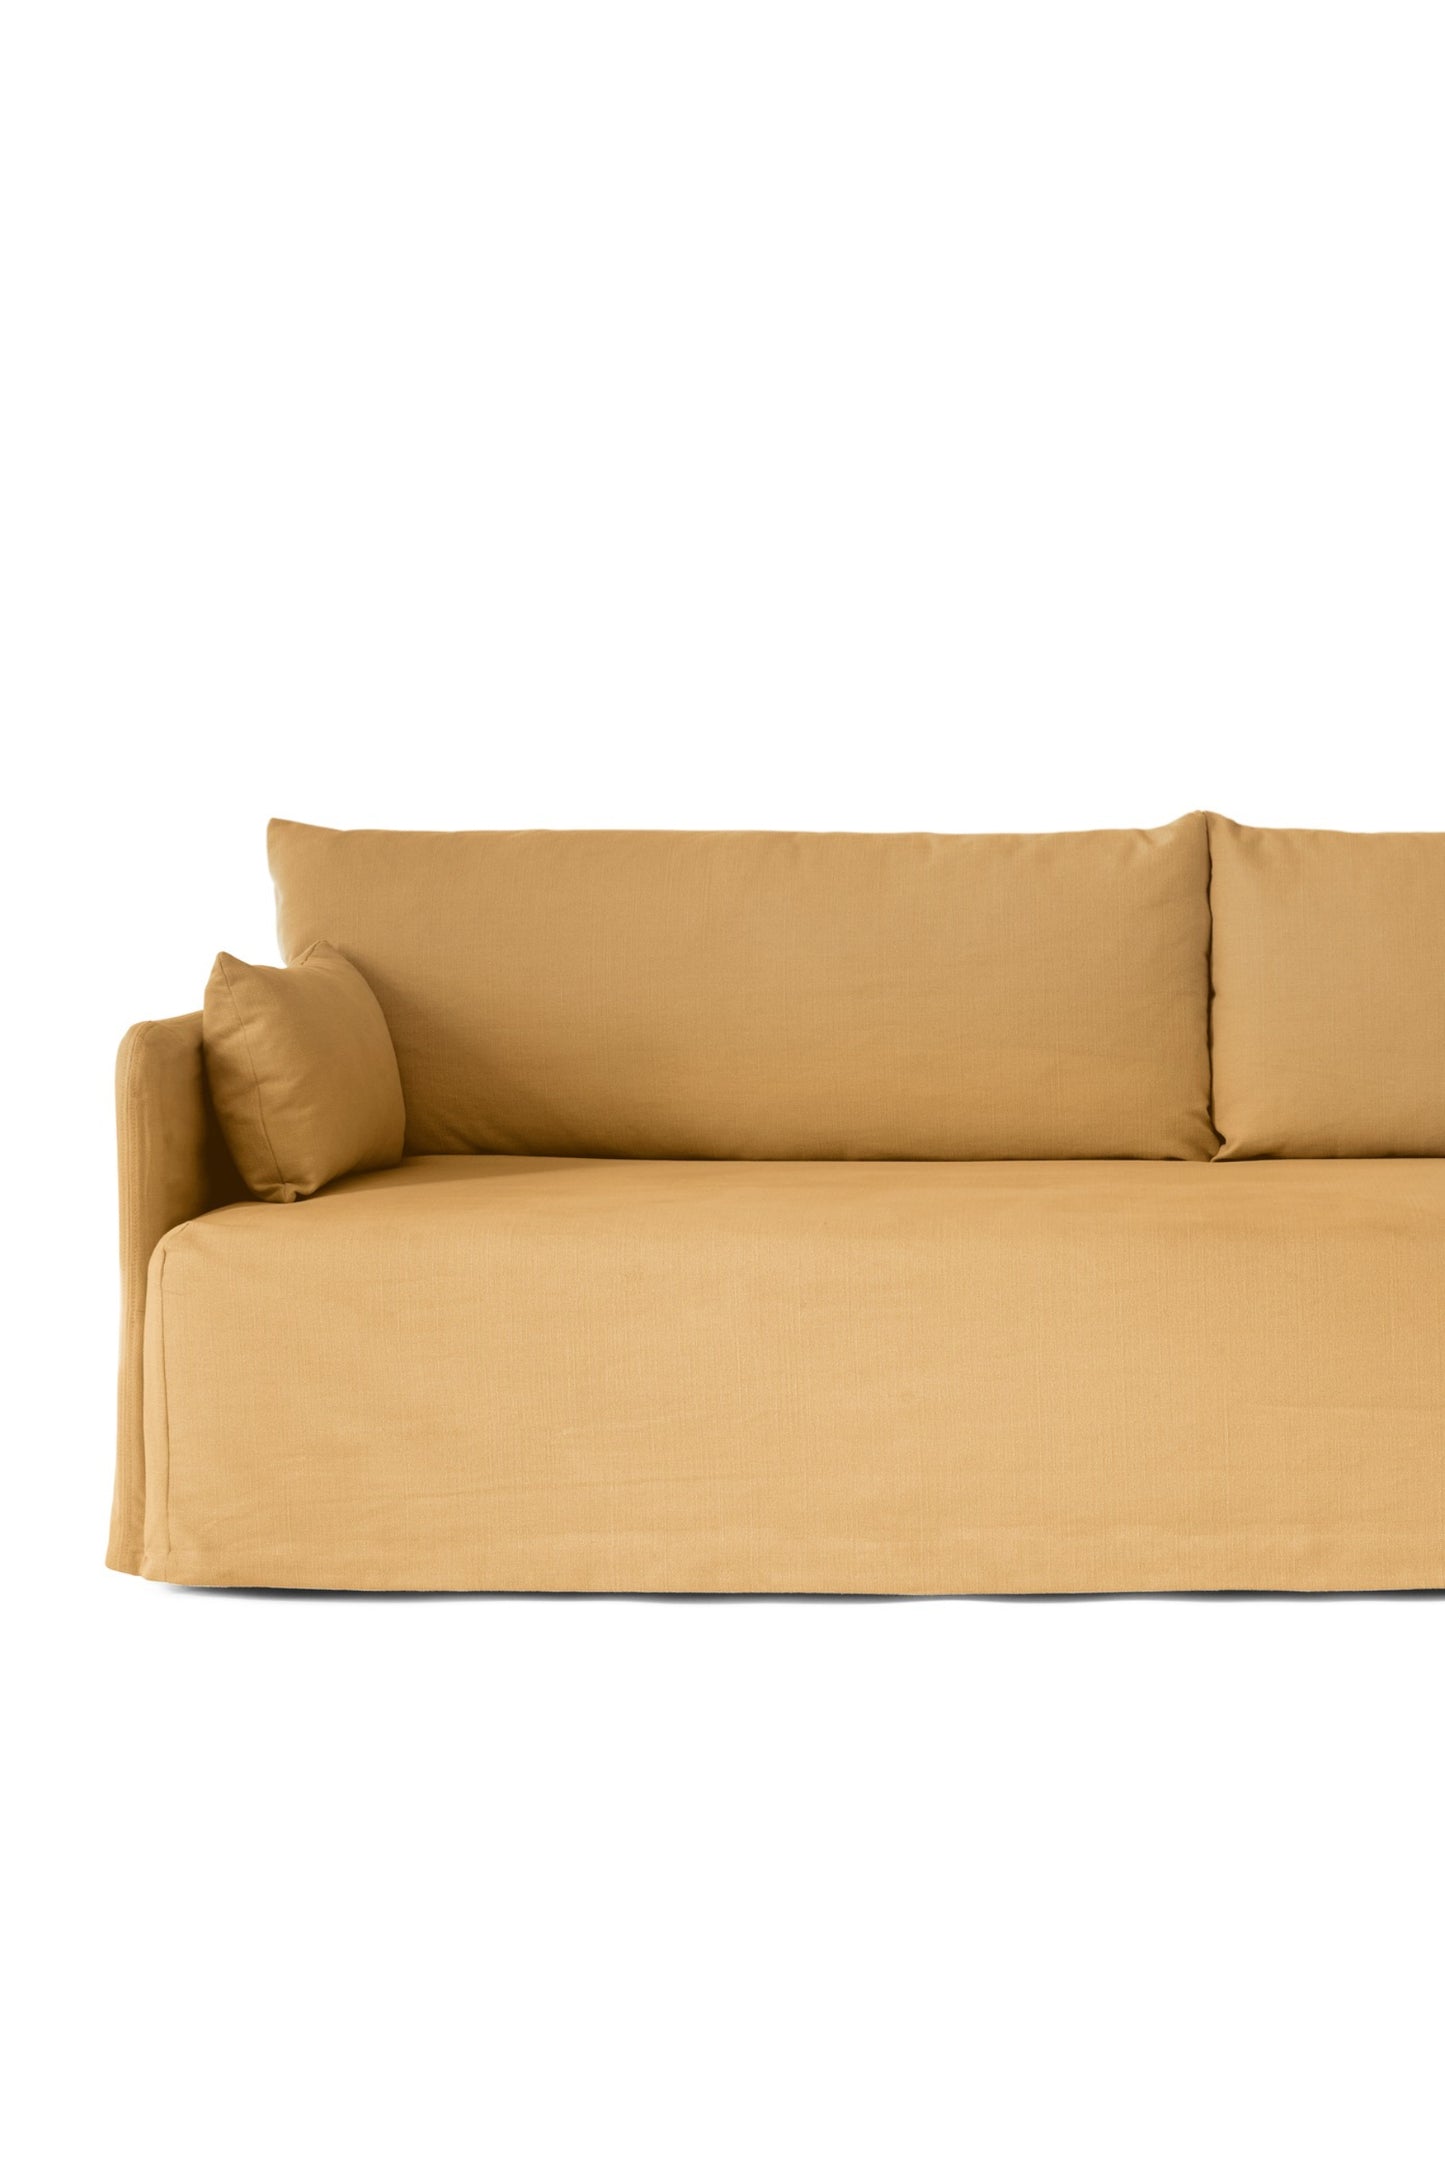 Offset Sofa with Loose Cover 3-seater by Menu.